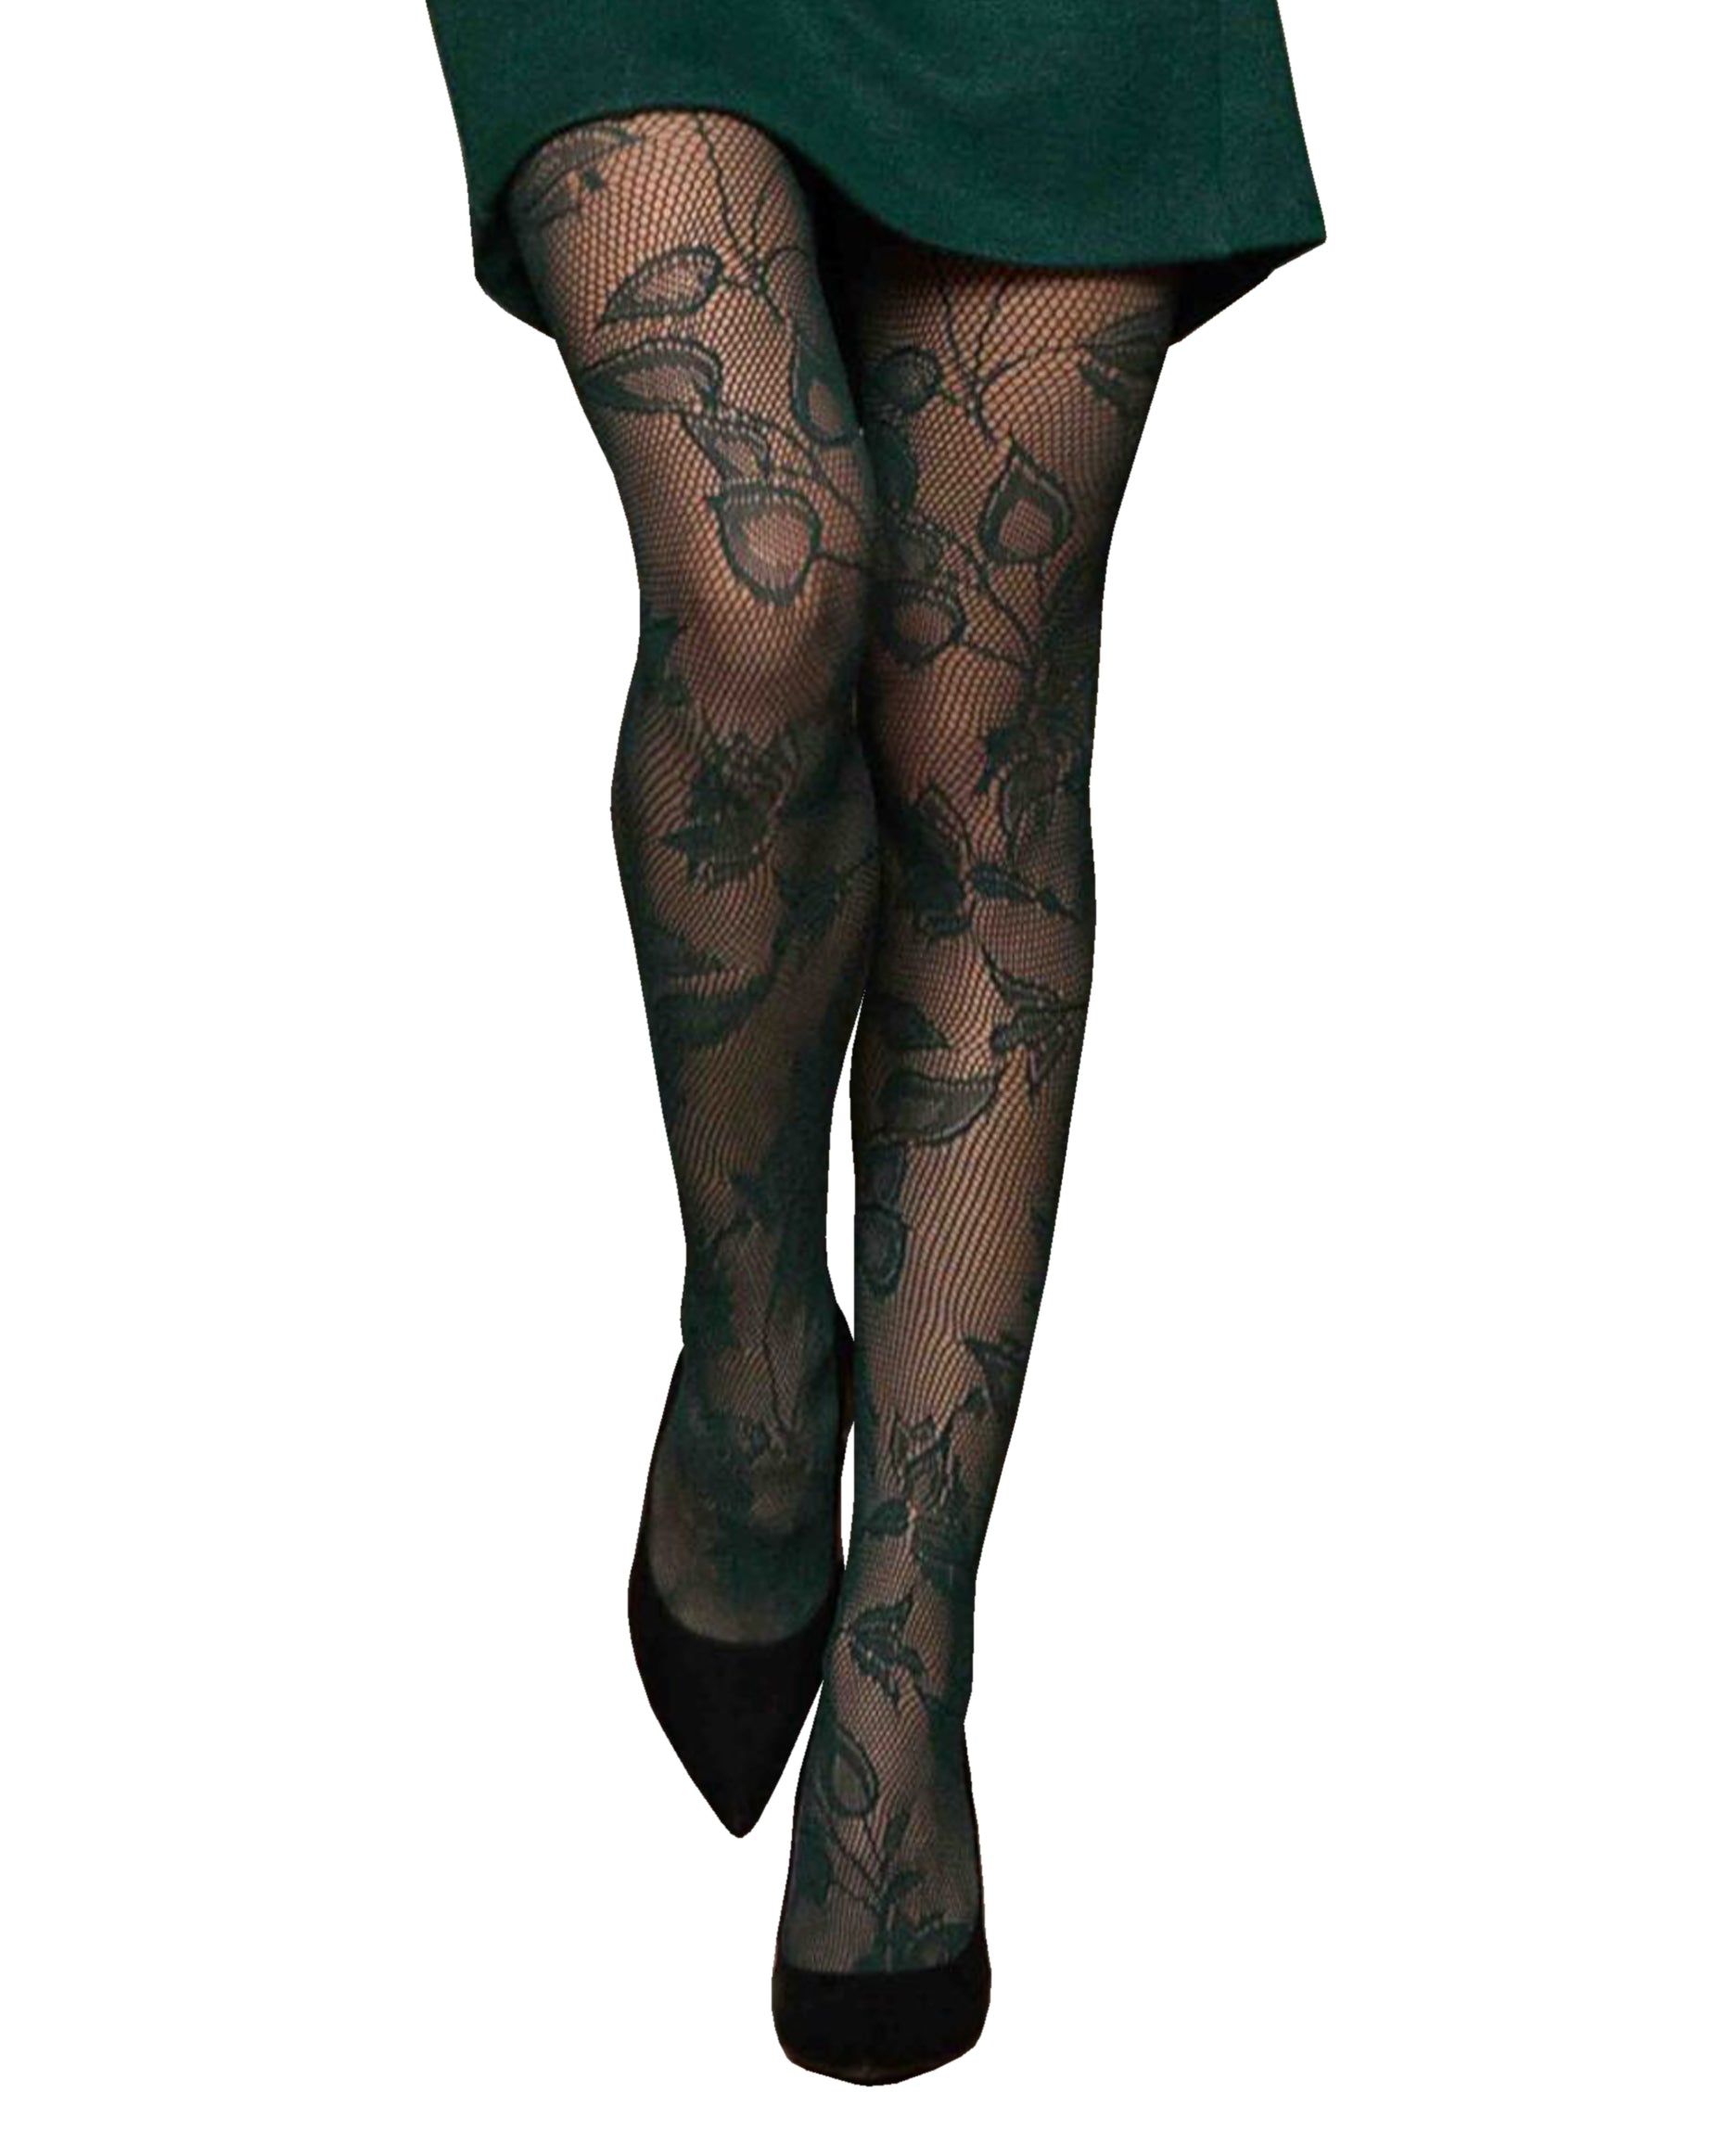 Omero Waterlily Collant - Green openwork fashion tights with a floral leaf lace style pattern.